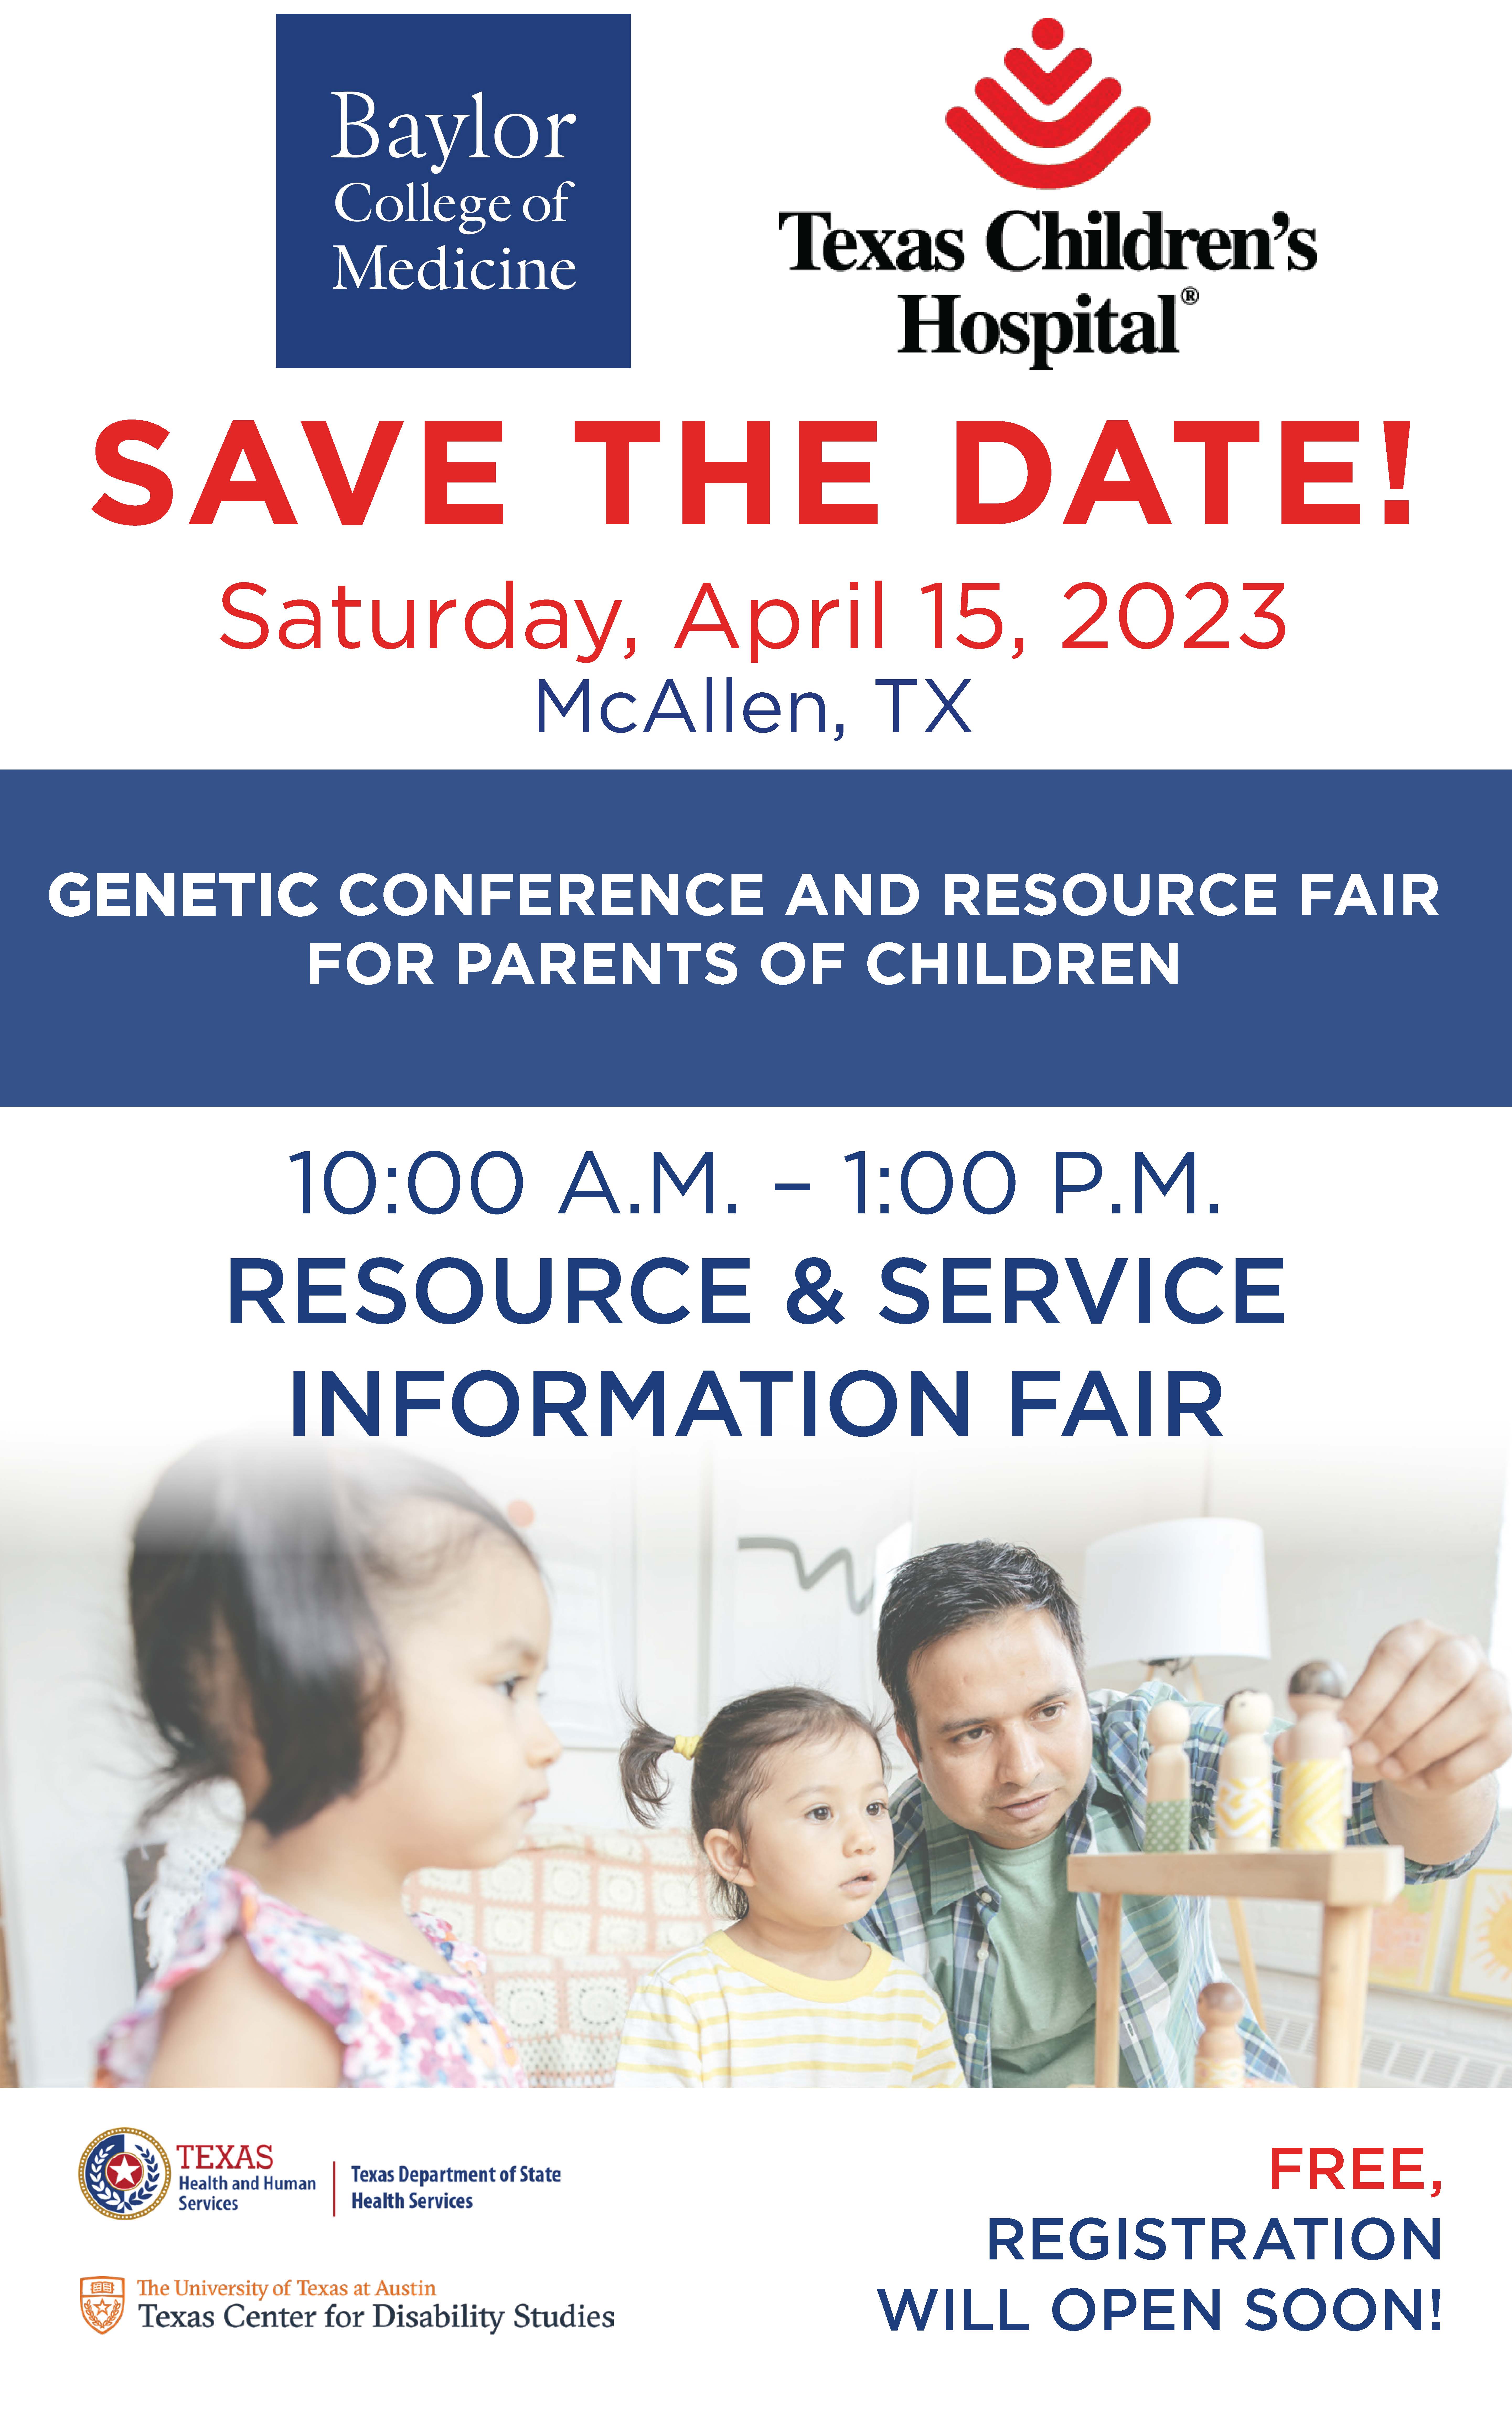 Genetics Conference and Resource Fair Flyer to be held on Saturday, April 15, 2023, in McAllen, TX.